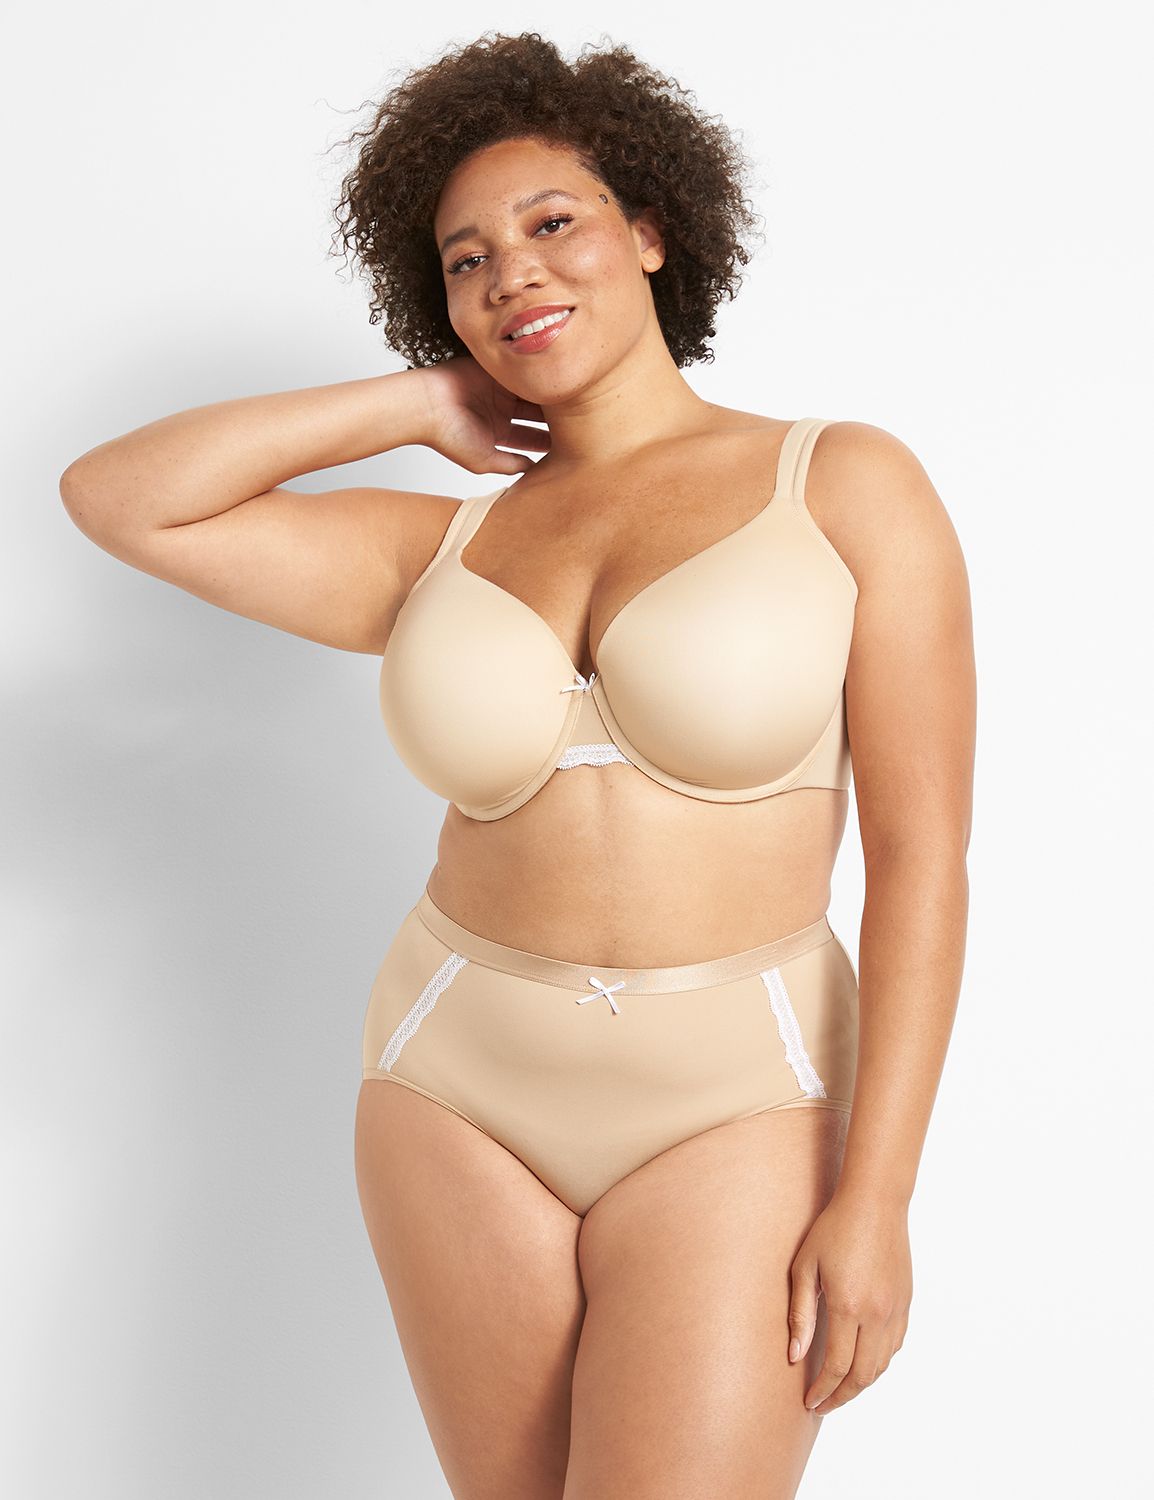 Cacique Ivory Lace Full Coverage Underwire Bra - Size 44DDD - Lightly  Padded - $18 - From Angie